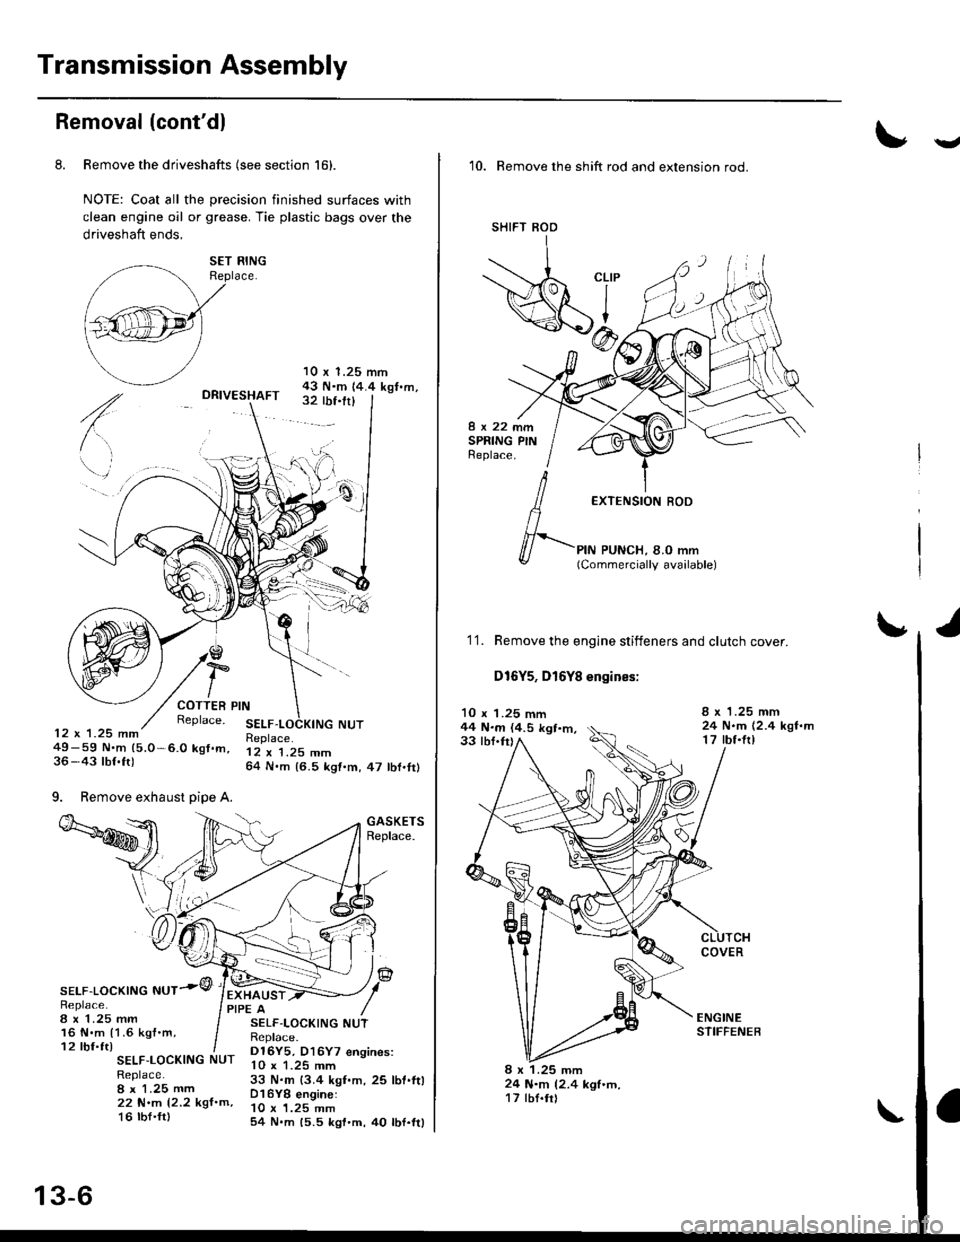 HONDA CIVIC 1996 6.G Workshop Manual Transmission Assembly
Removal (contdl
8. Remove the driveshafts (see section 161.
NOTE: Coat all the precision finished surfaces with
clean engine oil or grease. Tie plastic bags over the
driveshaft 